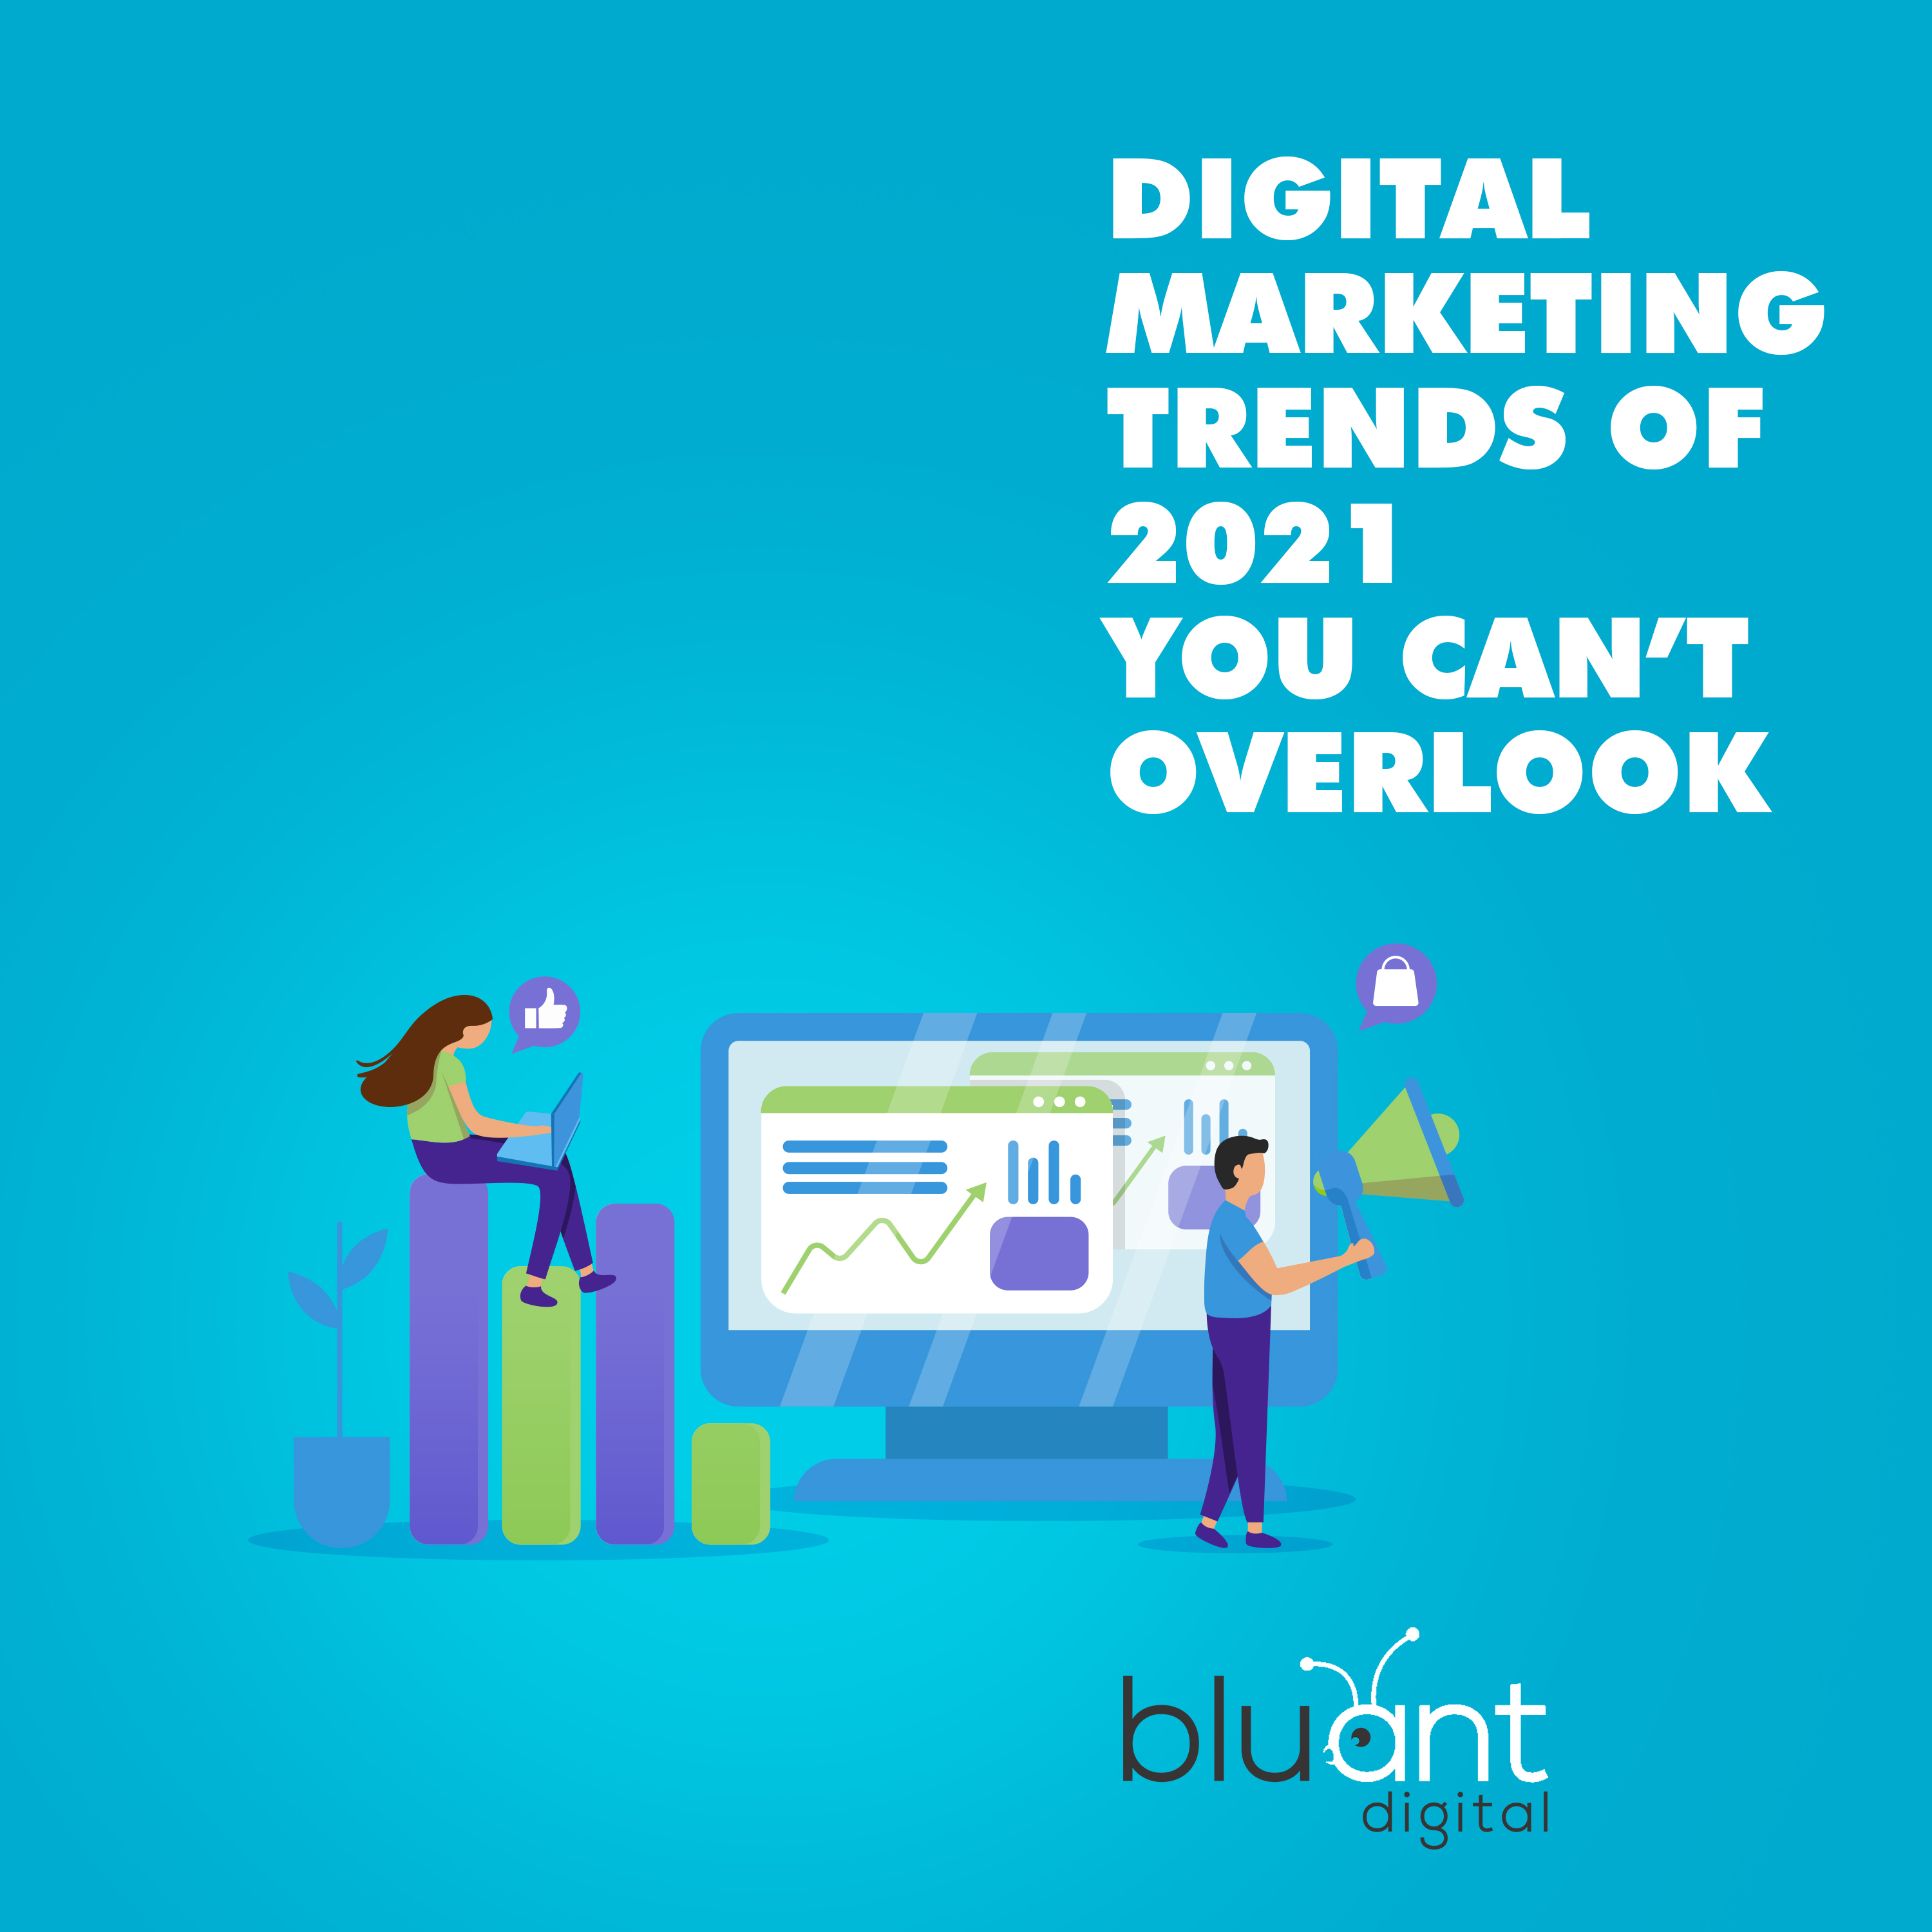 Digital Marketing Trends of 2021 You Can’t Overlook